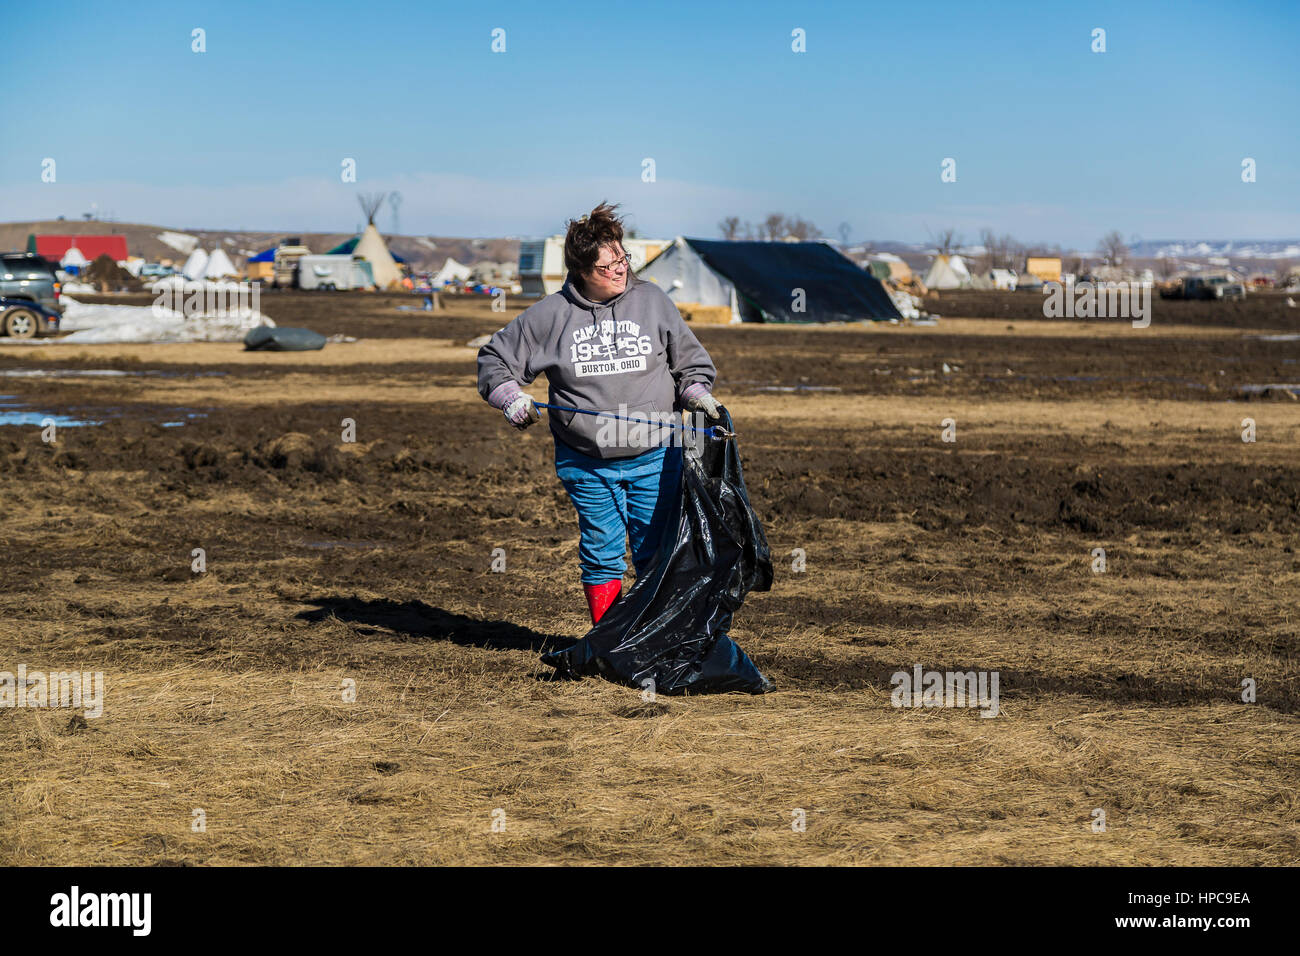 On February 20, 2017, water protectors in Standing Rock, North Dakota, continued their cleanup effort and attempted to negotiate an extension from being evicted from the Oceti Sakowin Camp, but were told by the Army Corps of Engineers that the notice of eviction would not change.   Hundreds of militarized law enforcement from various agencies, including The US National Guard and Homeland Security, will reportedly raid the camp at 2 p.m. on Wednesday, February 22, 2017 and will arrest all water protectors who refuse to leave.   Photo: Cronos/Michael Nigro Stock Photo